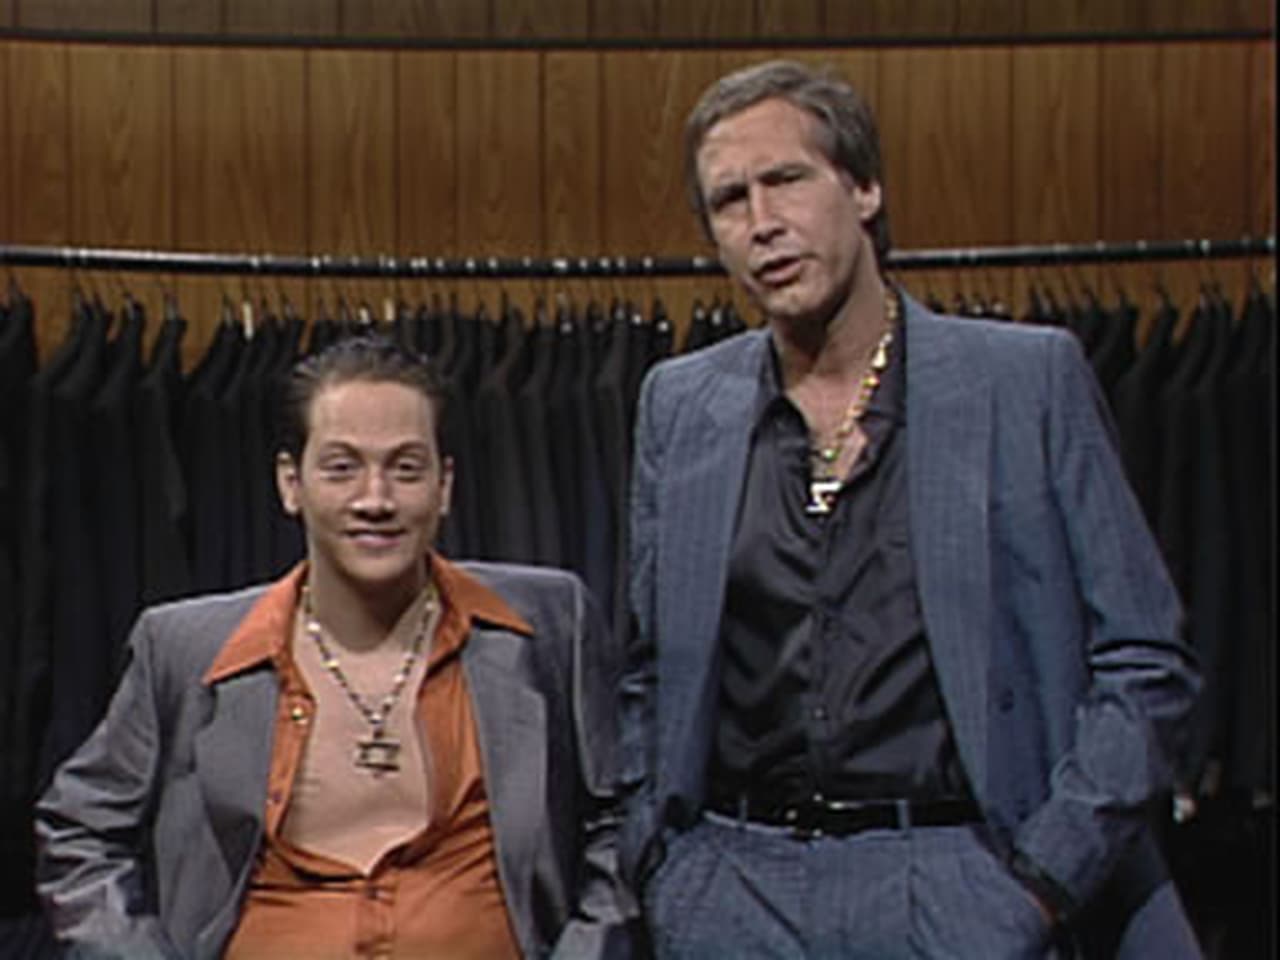 Saturday Night Live - Season 17 Episode 11 : Chevy Chase/Robbie Robertson & Bruce Hornsby